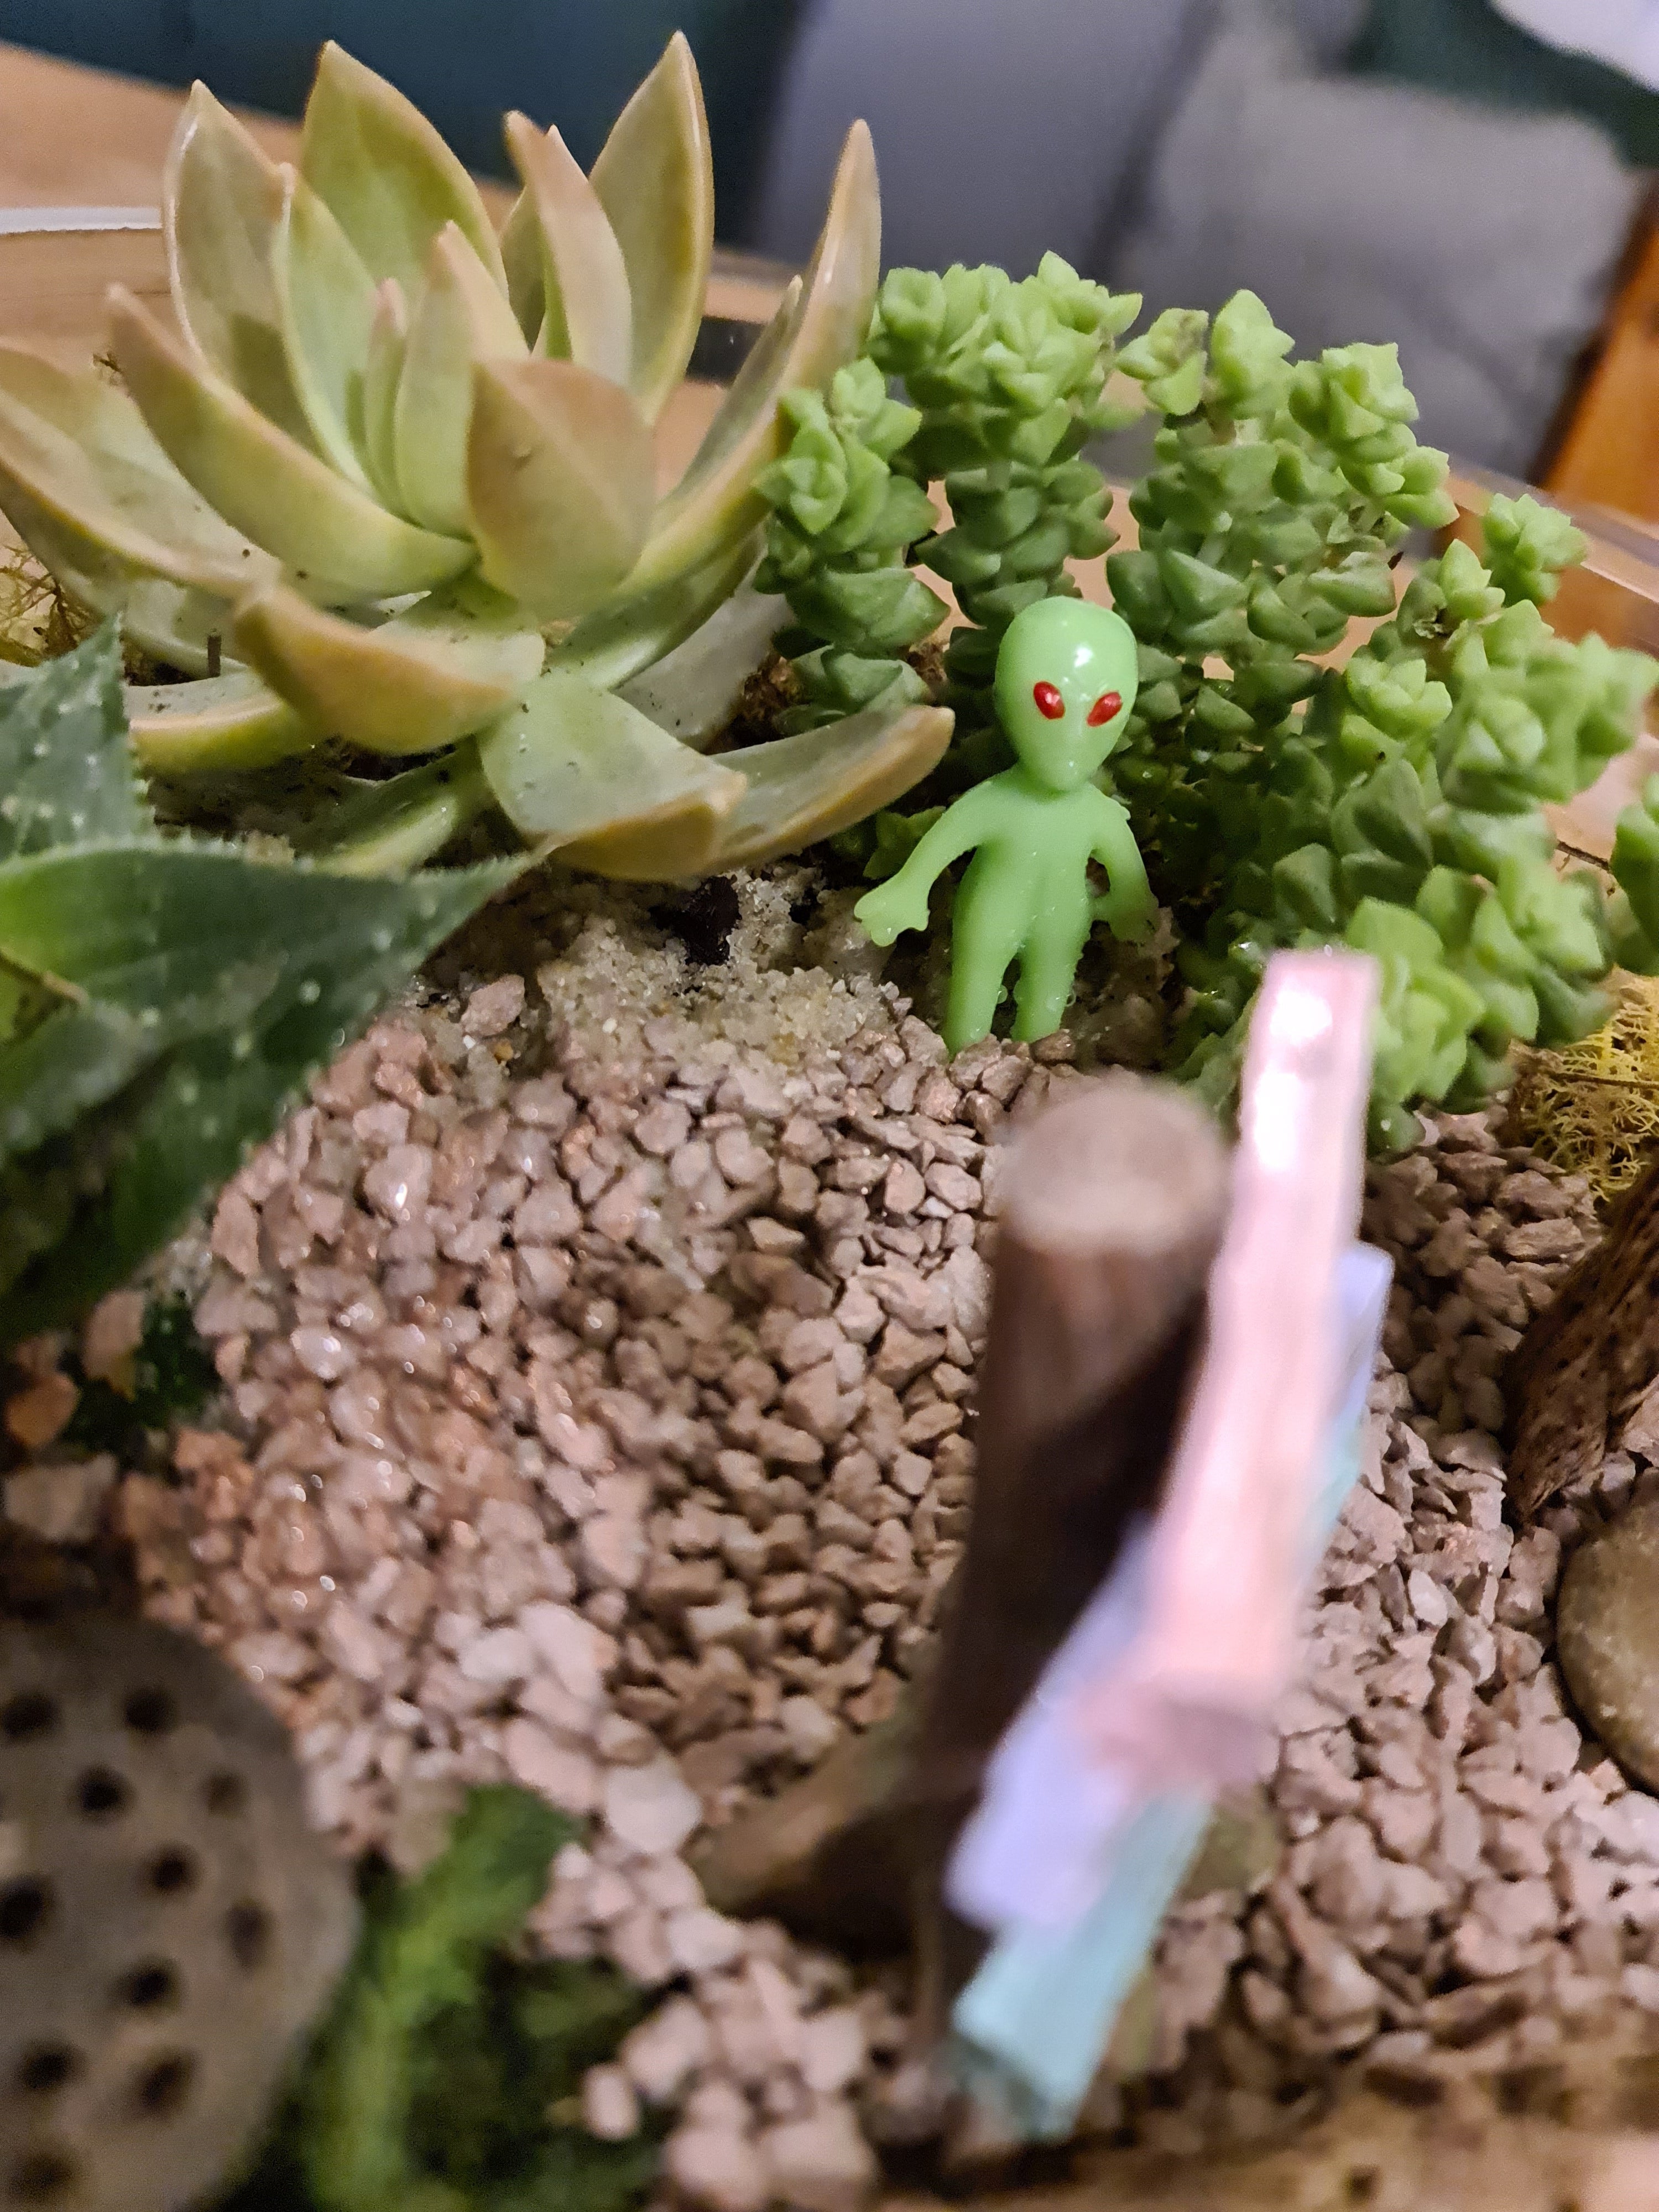 Little alien figure is in the succulent bowl when zoomed in on the contents.